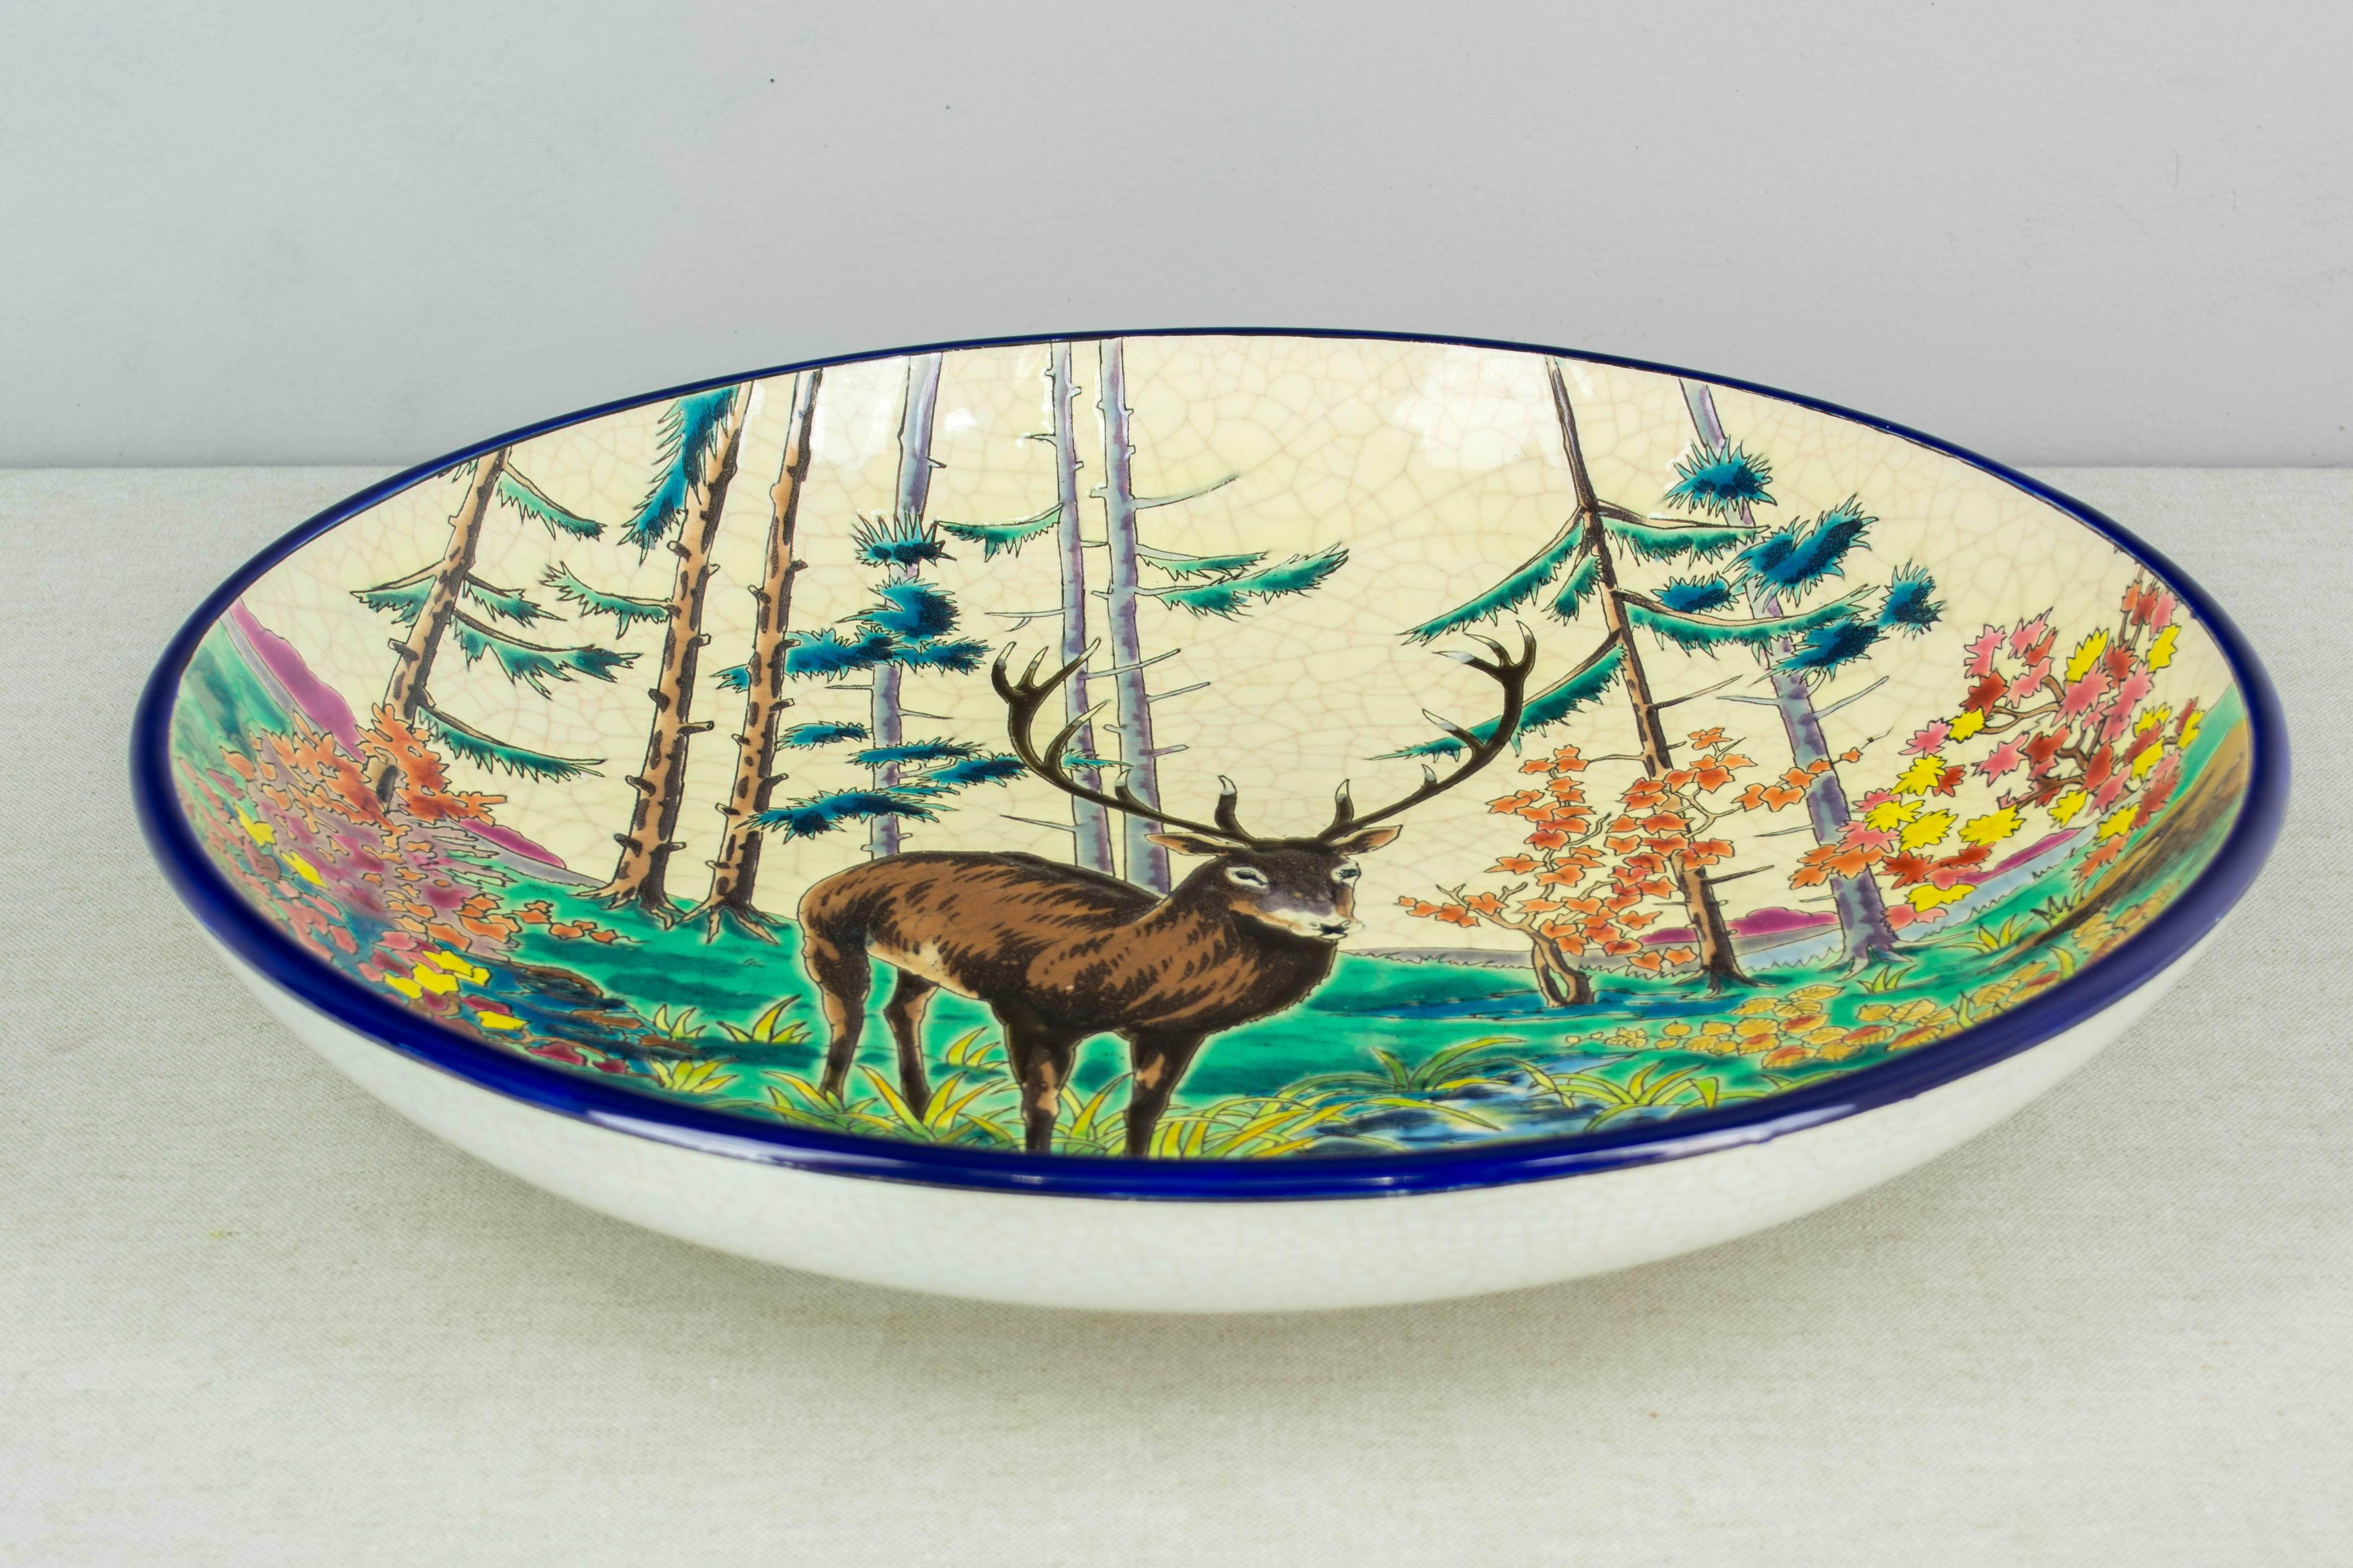 Large decorative French Longwy pottery deep wall charger, enamelled with a buck near a stream surrounded by colorful foliage. Craquelle white ground and cobalt blue rim. Beautiful vivid color and unusual large size. Designed by Paul Mignon and